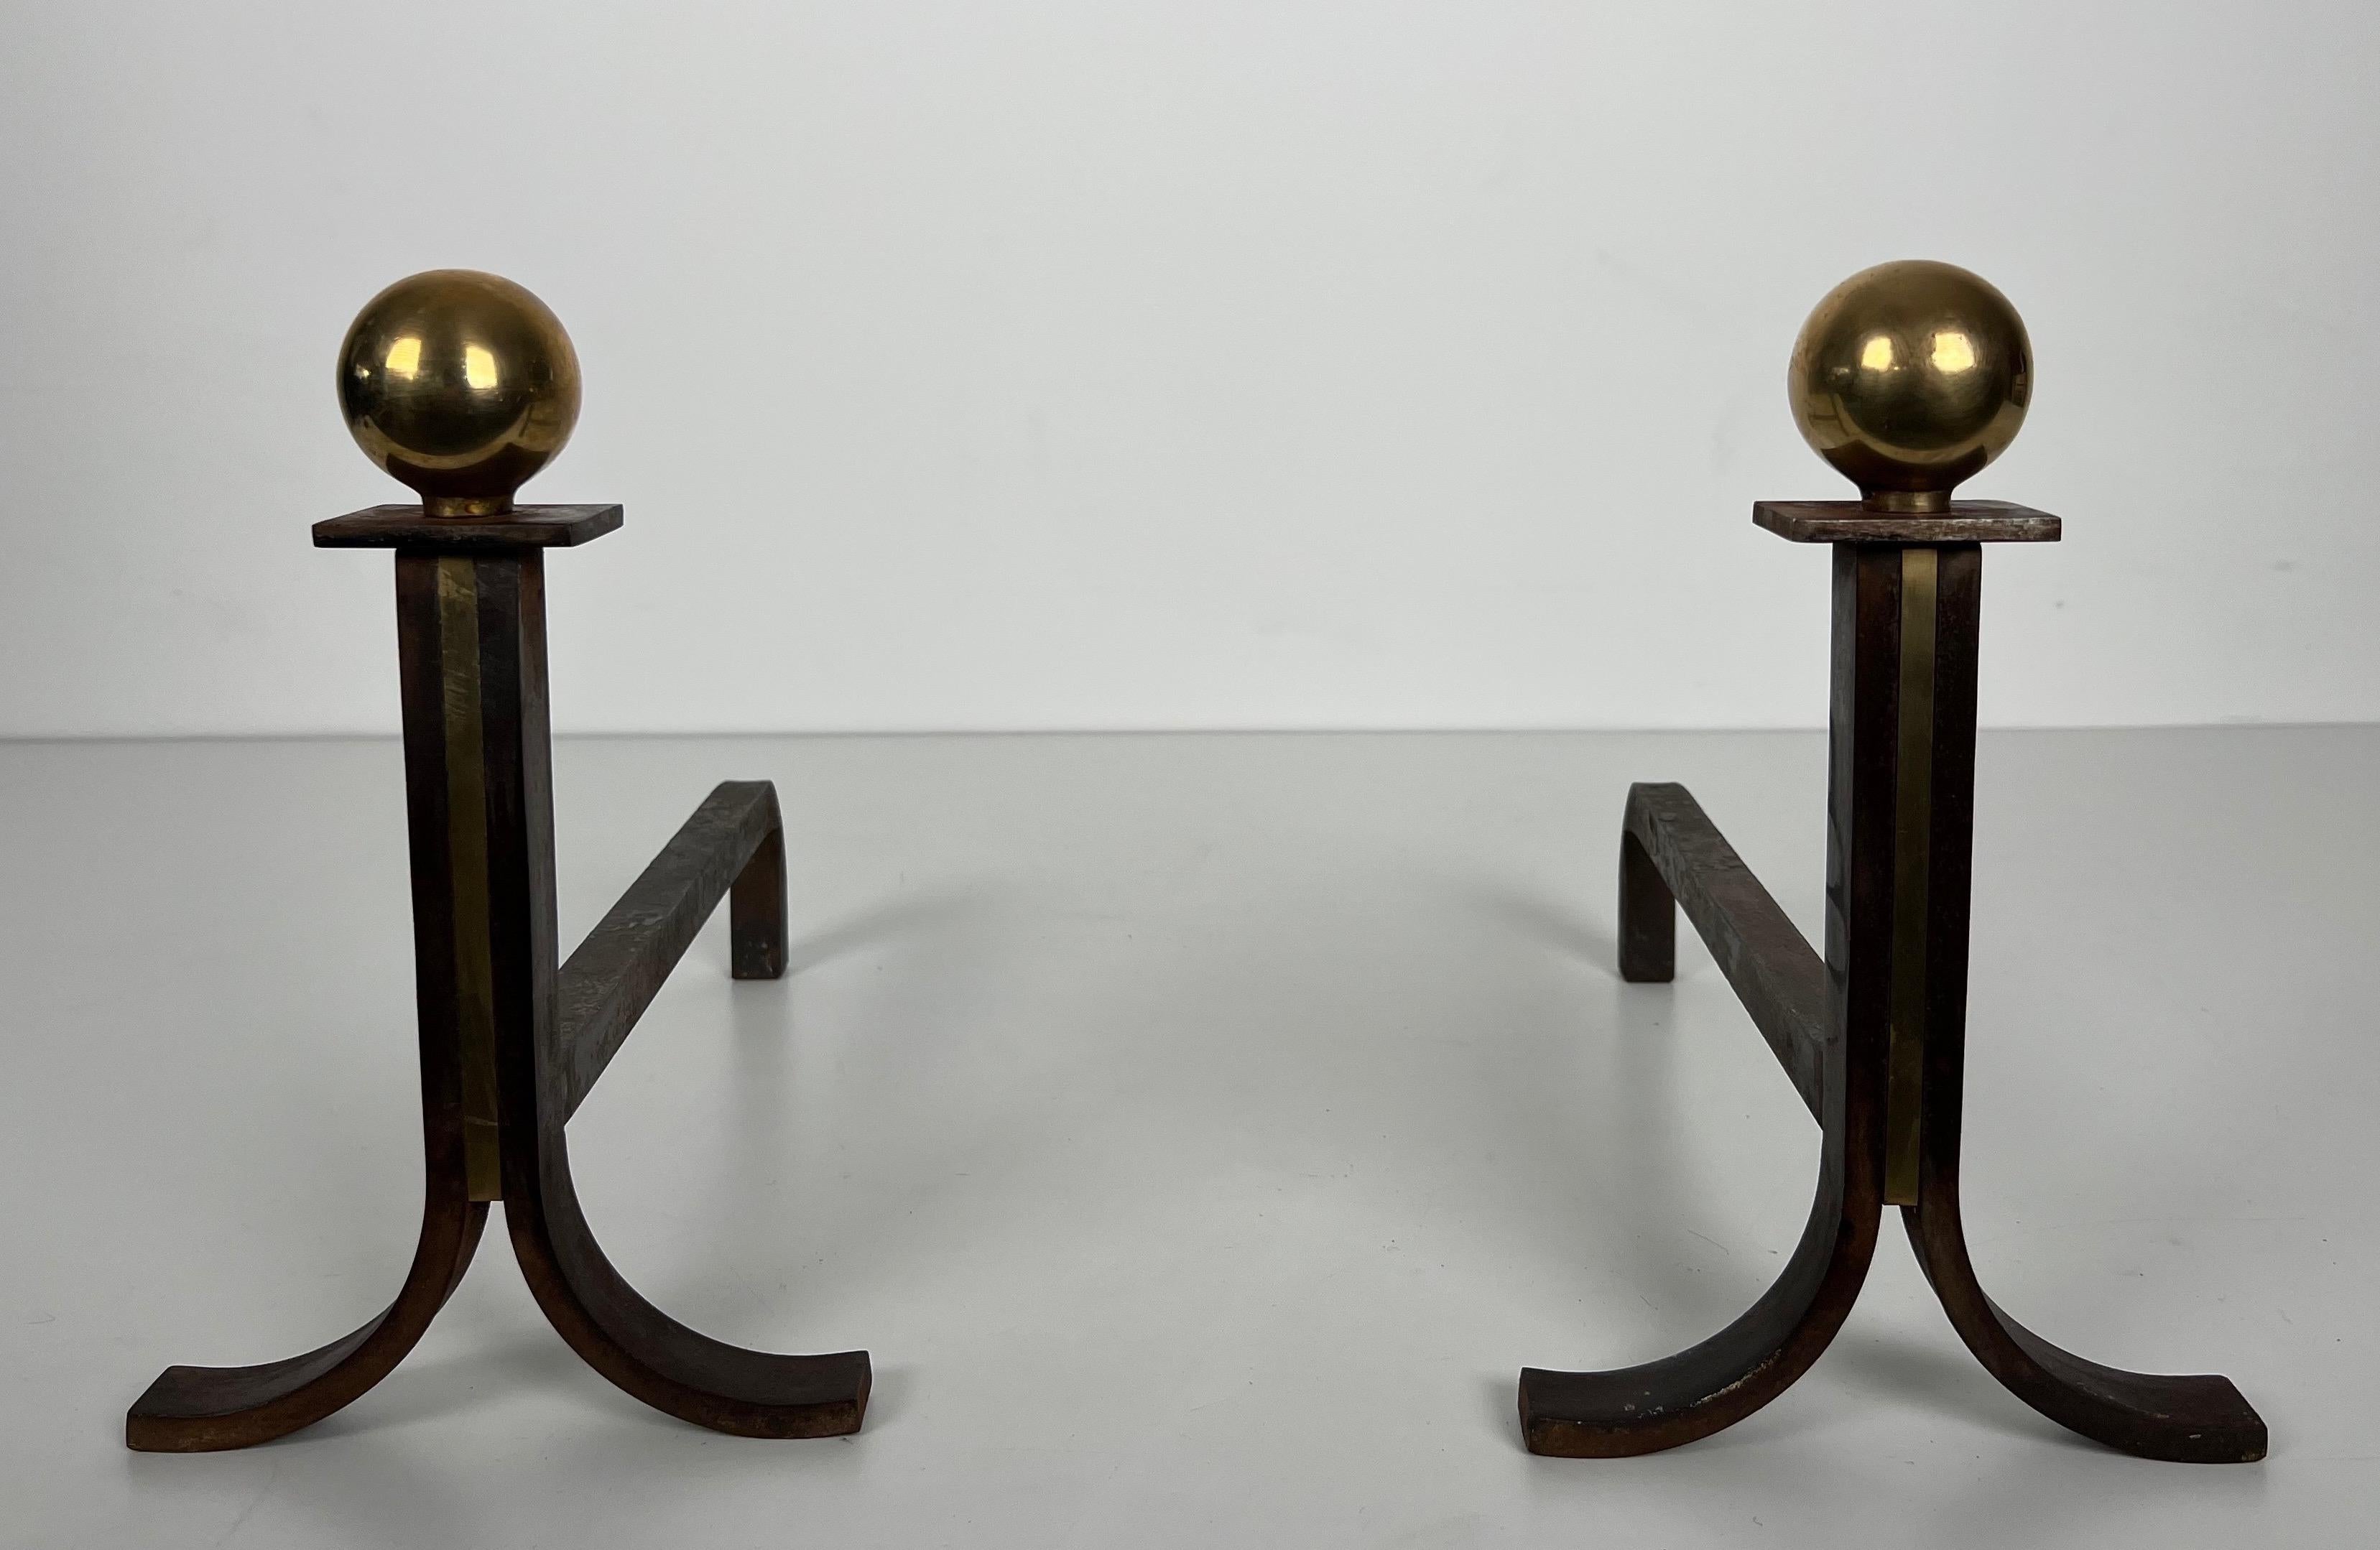 This very nice and elegant pair of modernist andirons is made of steel, brass and wrought iron. This is a French work in the style of Jacques Adnet. Circa 1940